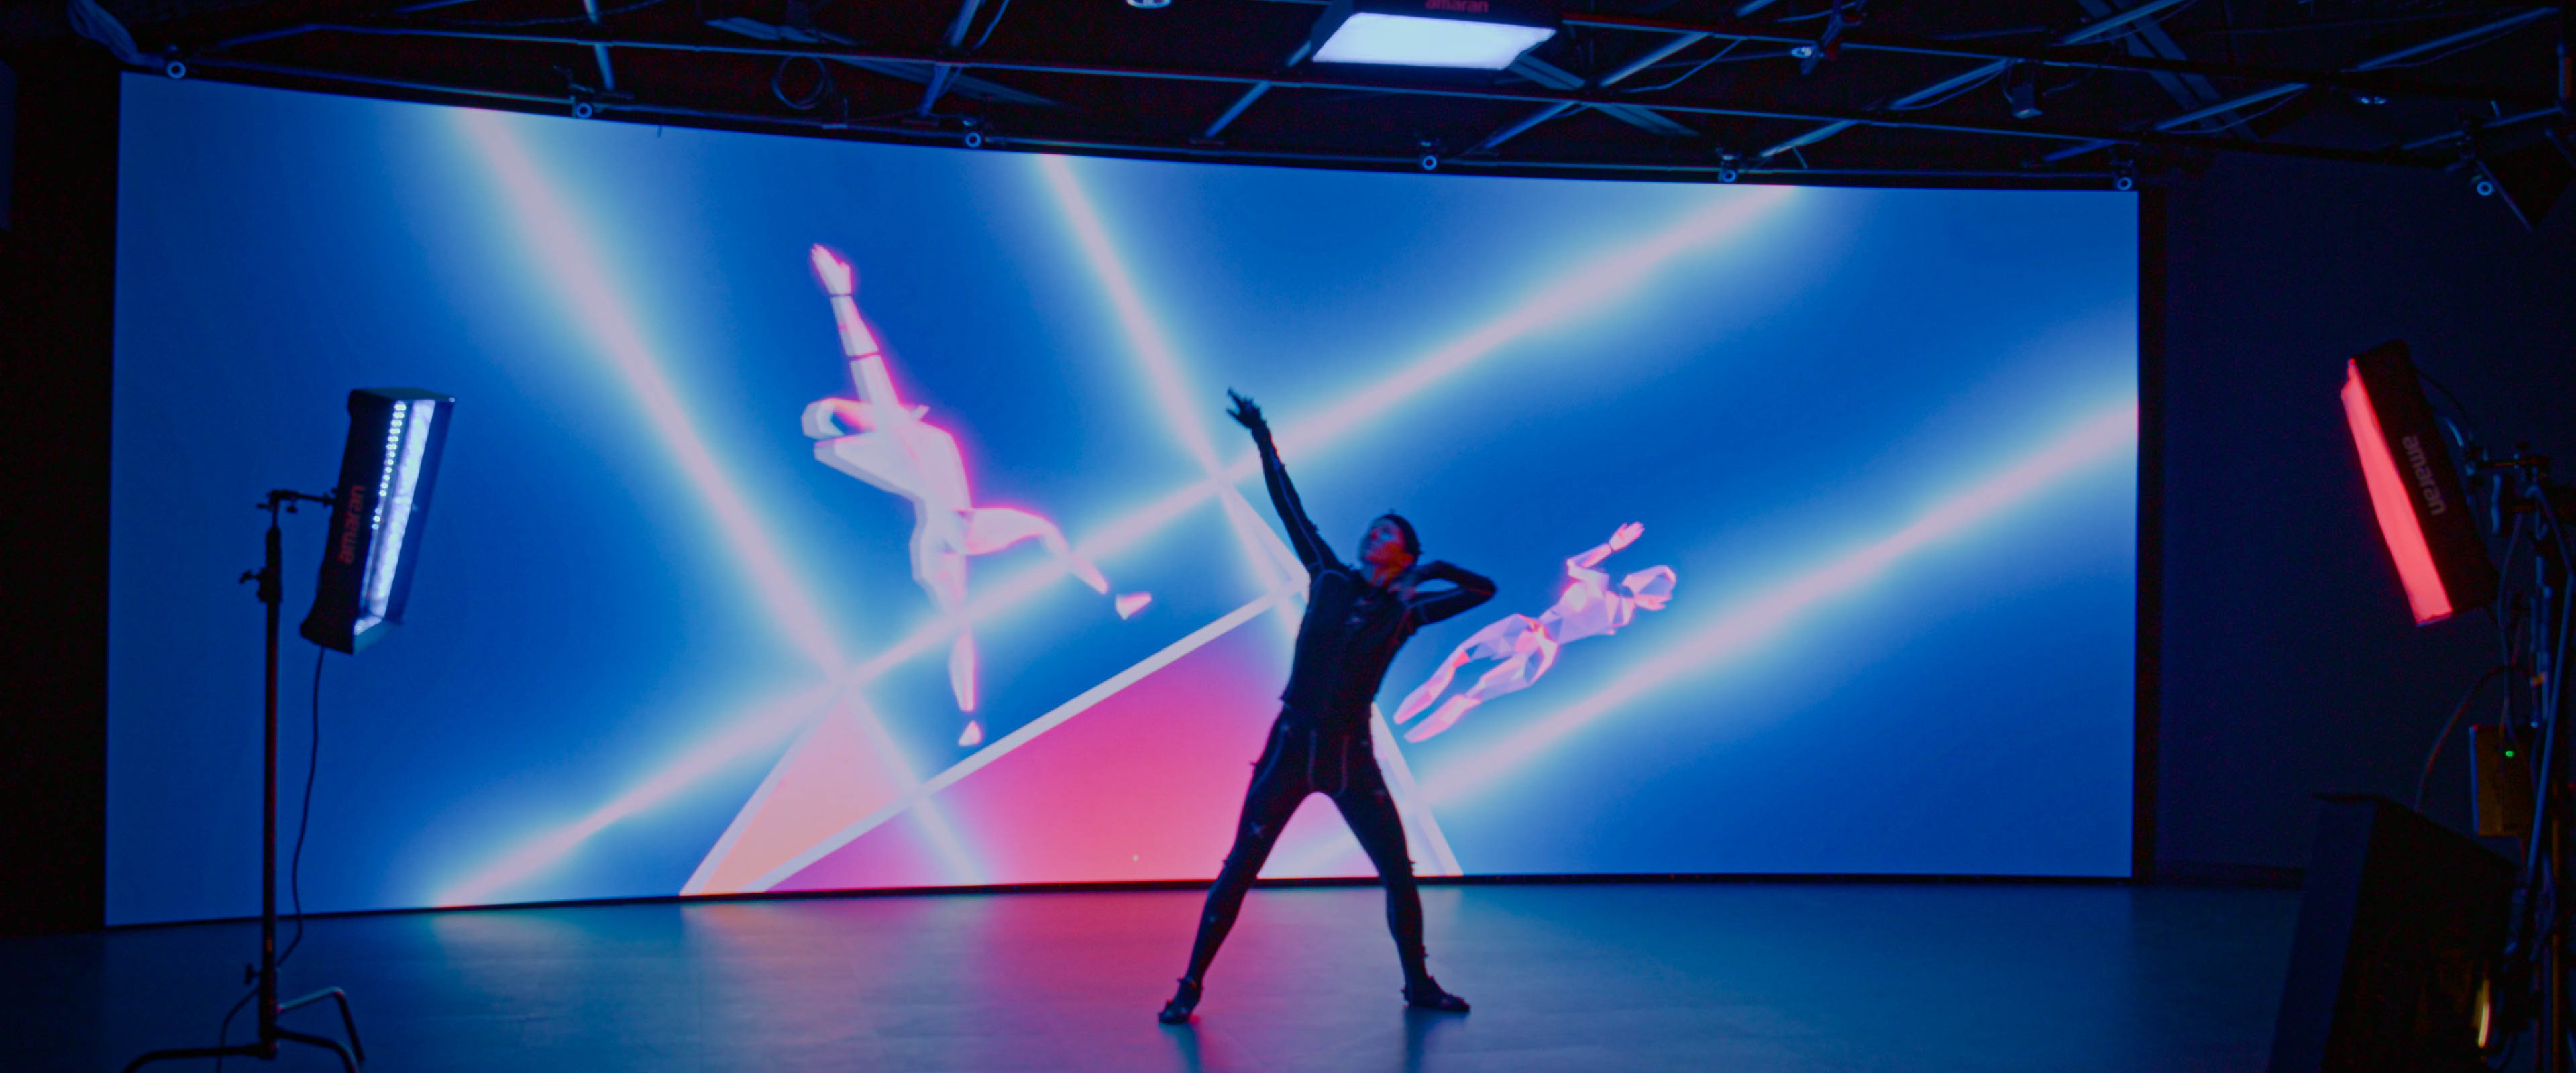 Dancer performing in motion capture with corresponding avatars on the LED wall.